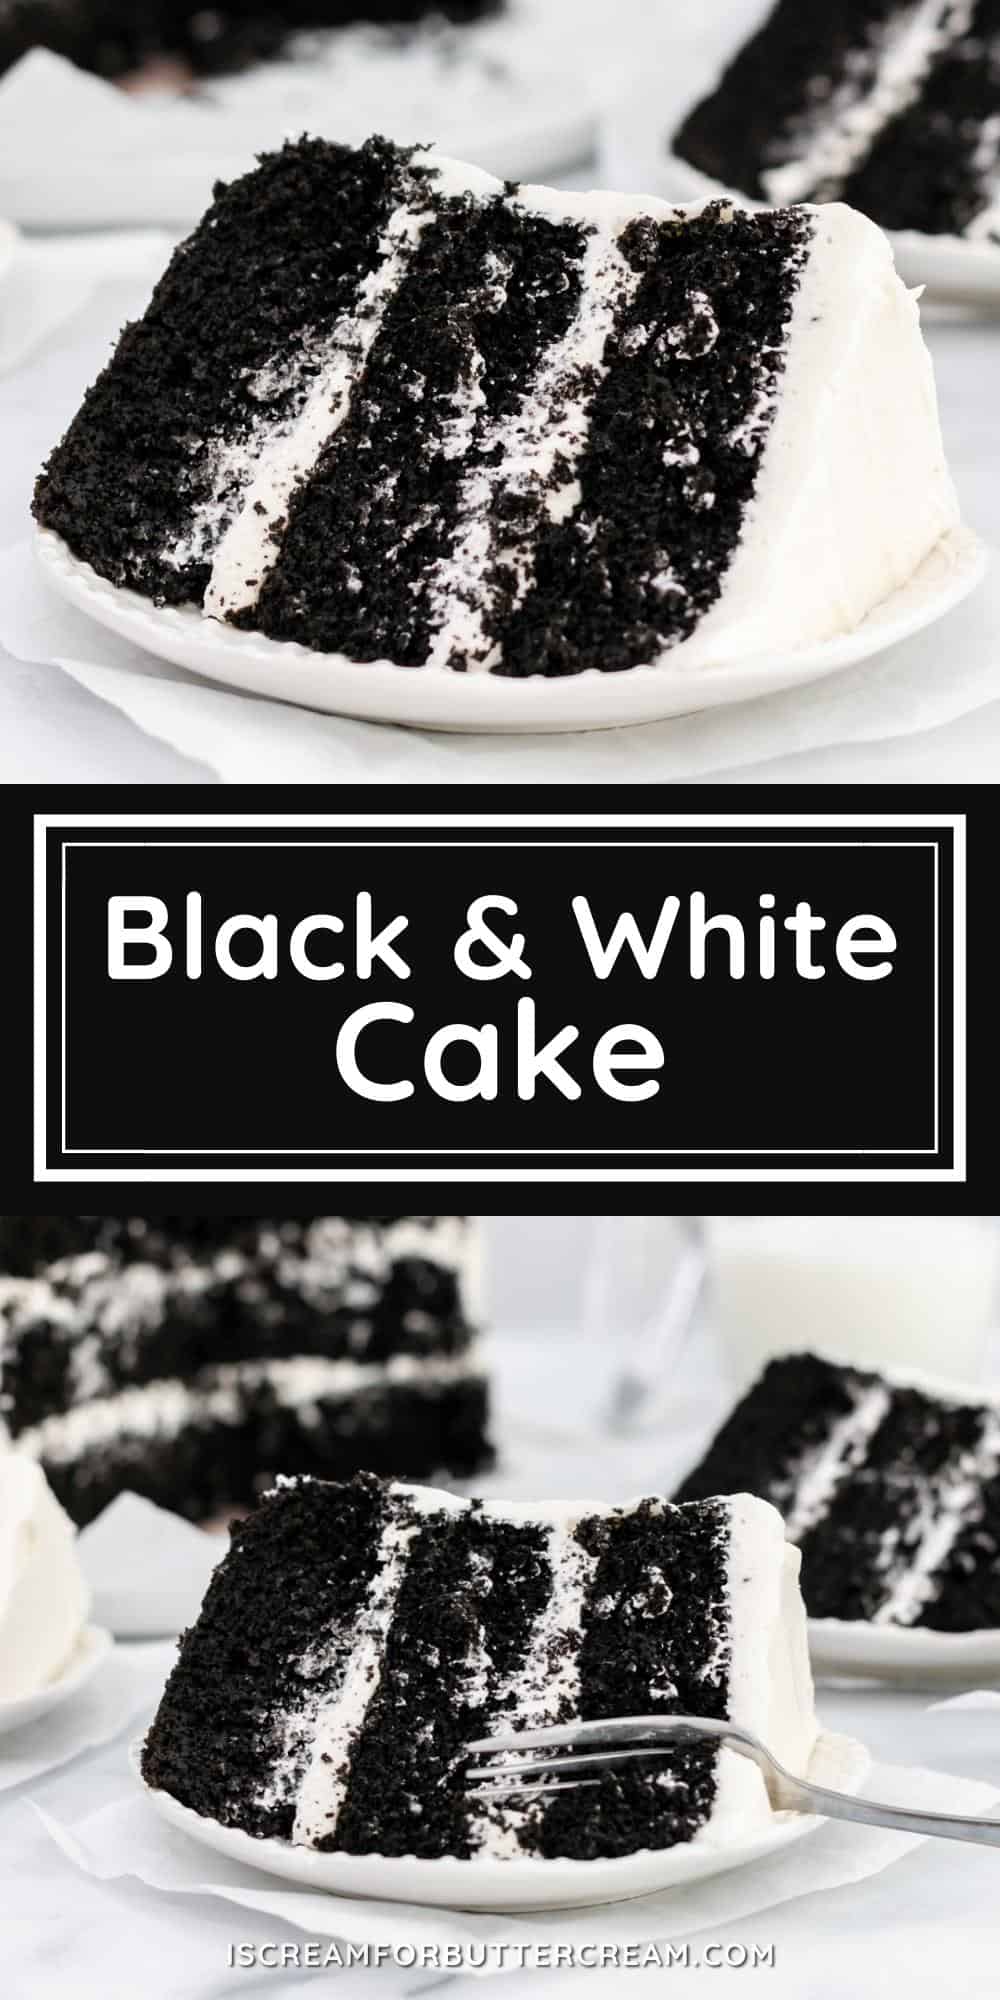 Collage of black cocoa cake with text overlay.